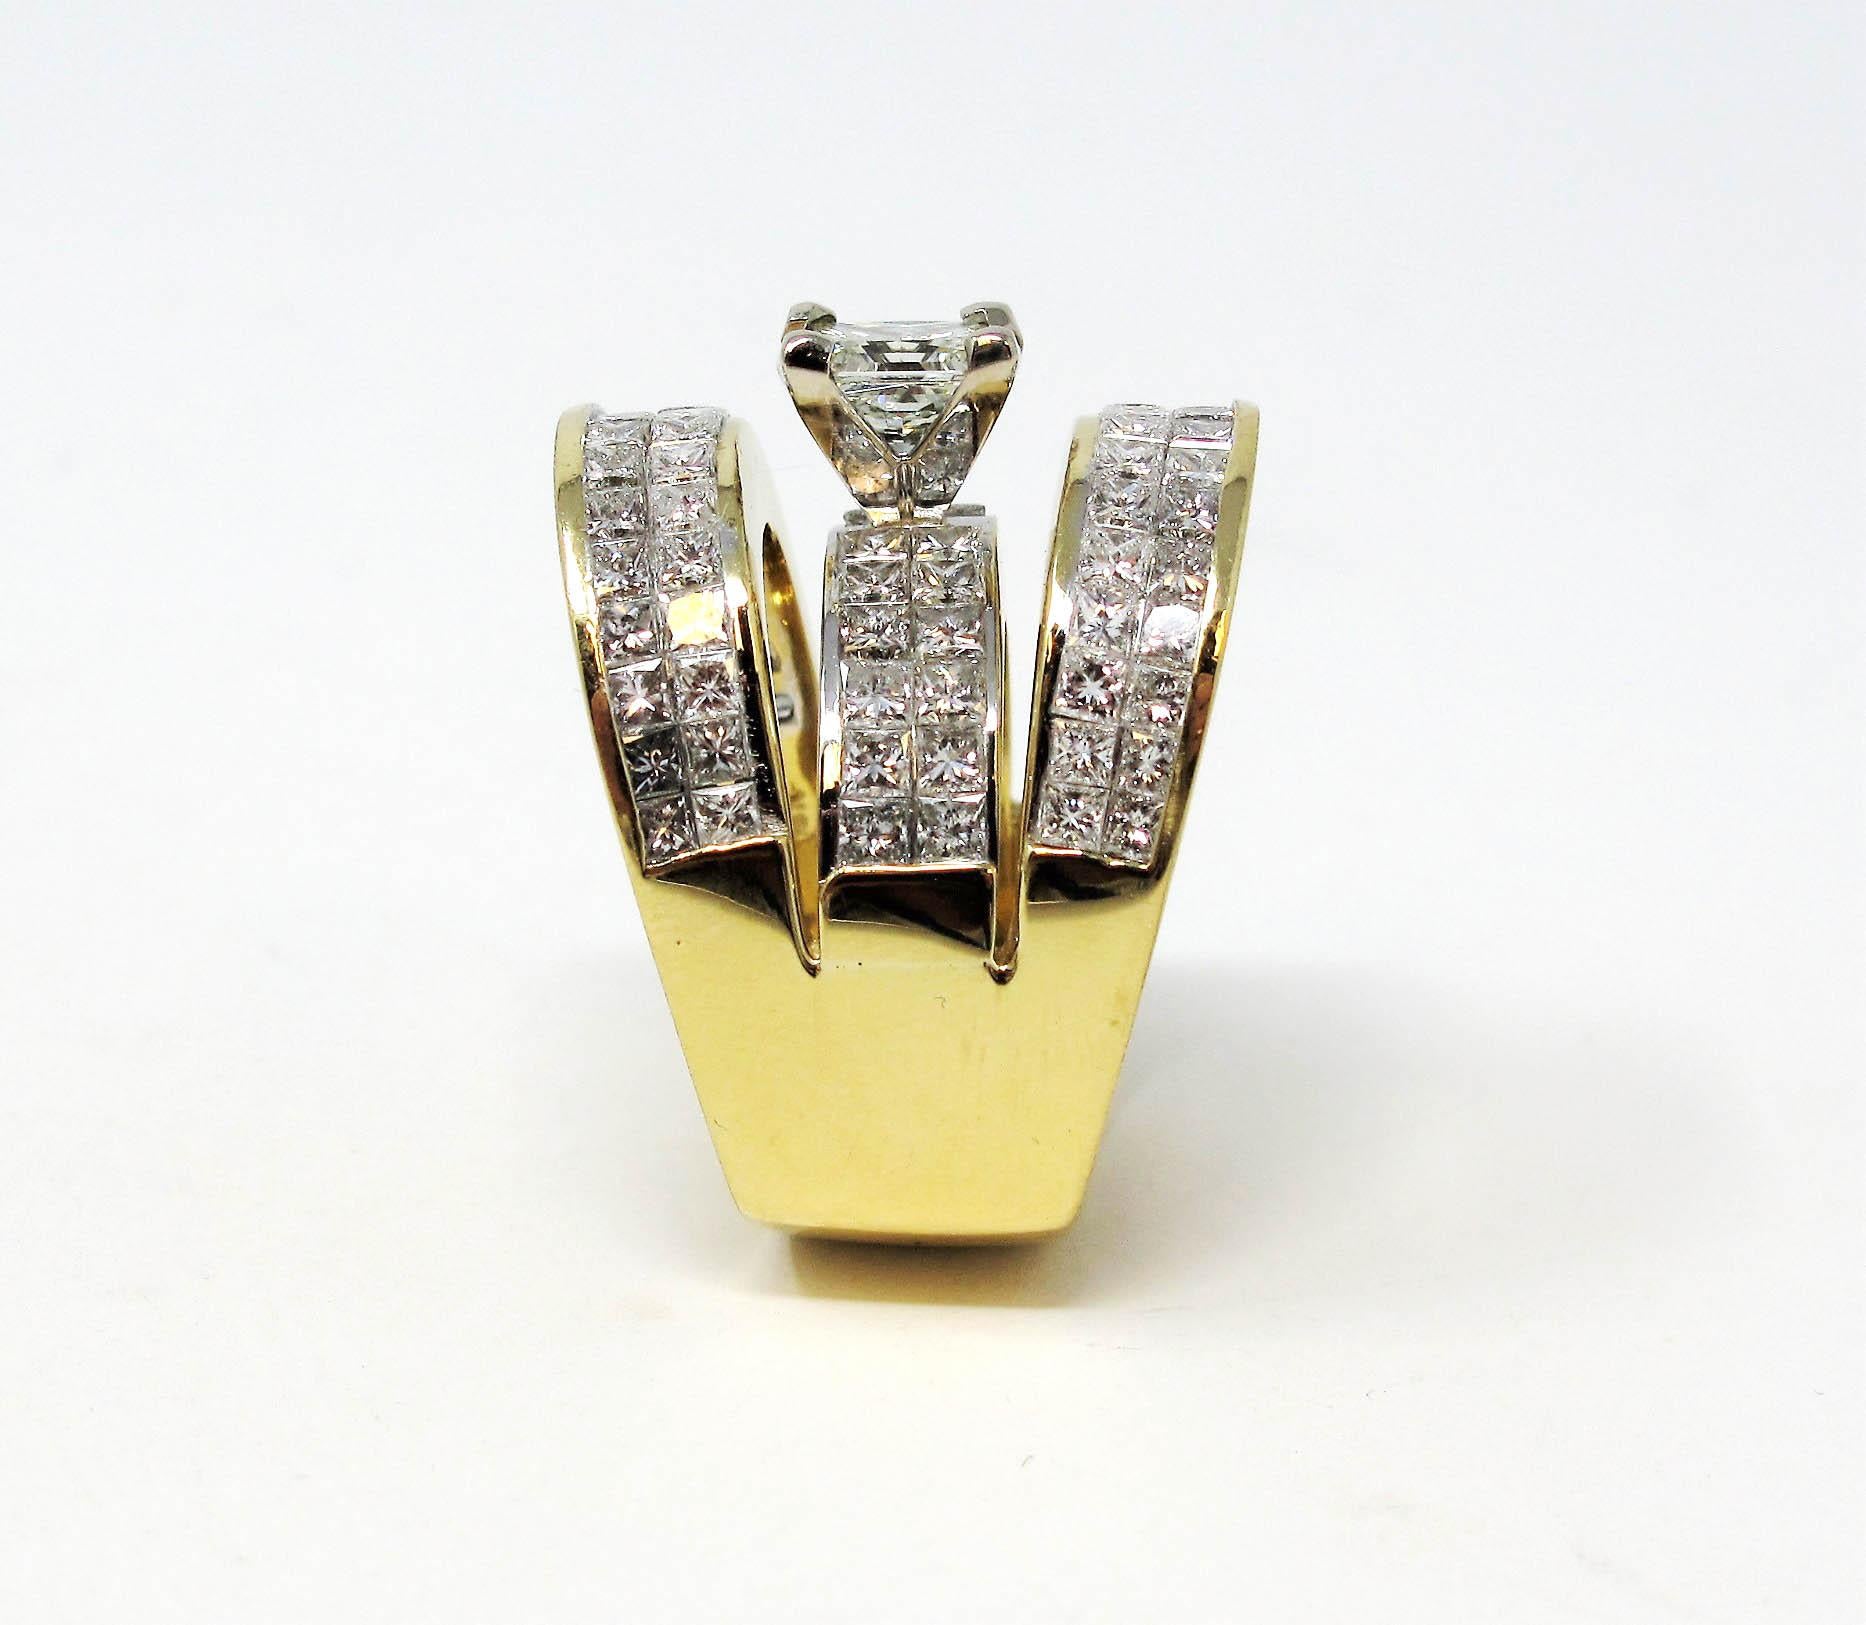 6.86 Carat Total Princess Cut Diamond Triple Row Wide Cocktail Ring 18K Gold In Good Condition For Sale In Scottsdale, AZ